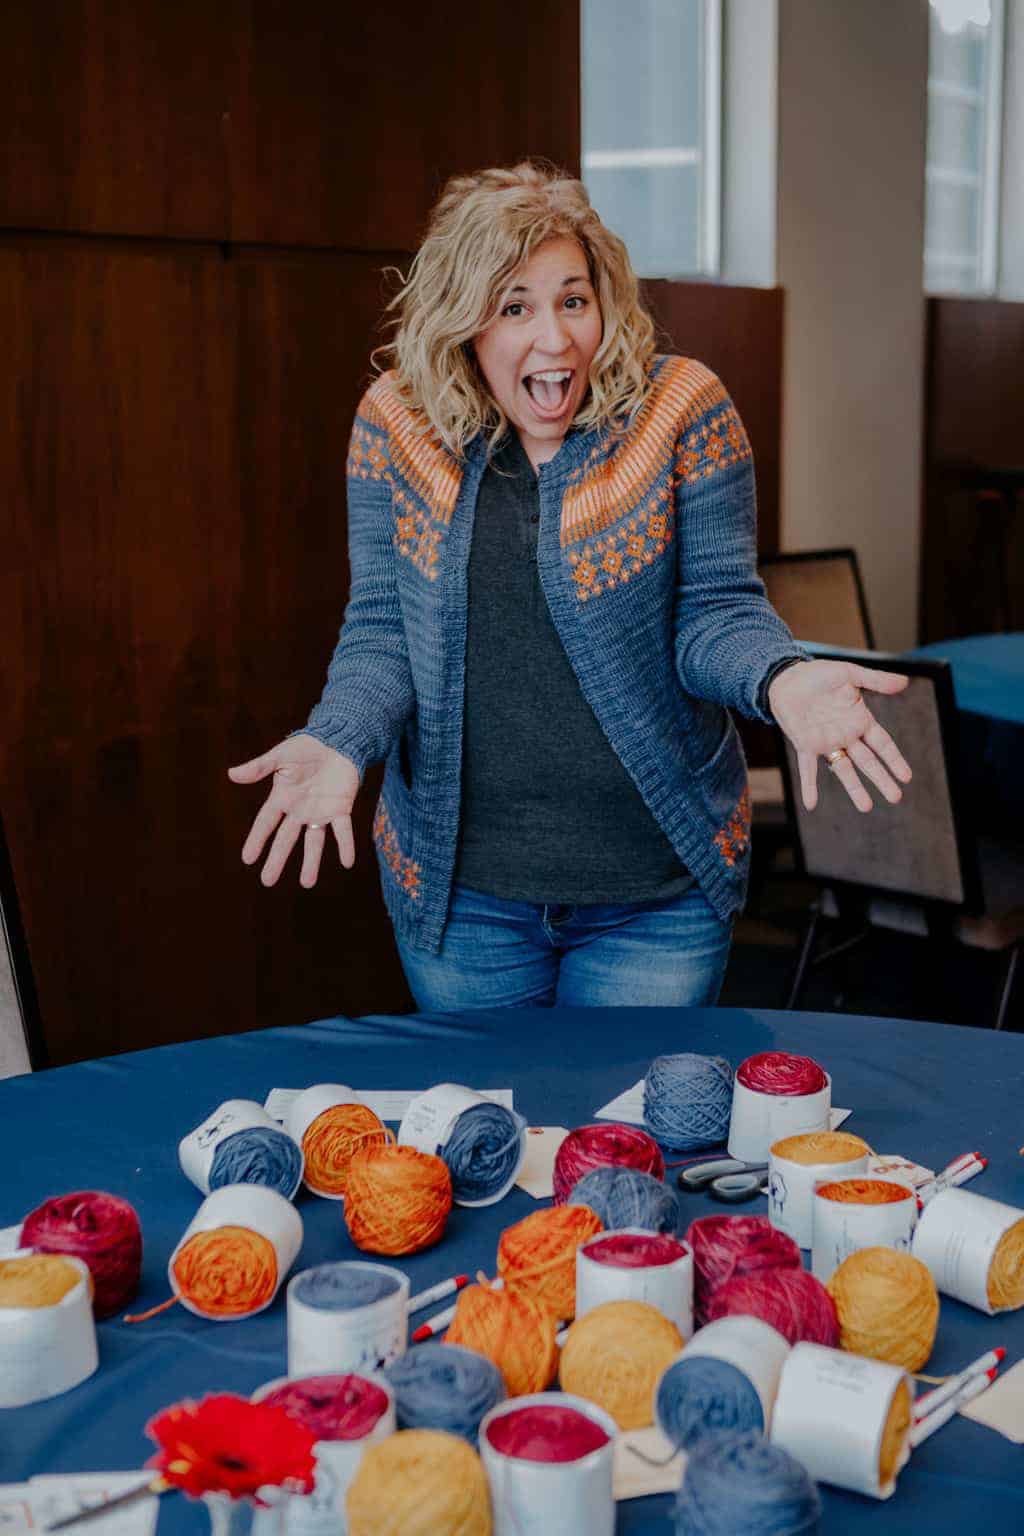 A woman wearing a blue and orange sweater stands over a table of colorful yarn.